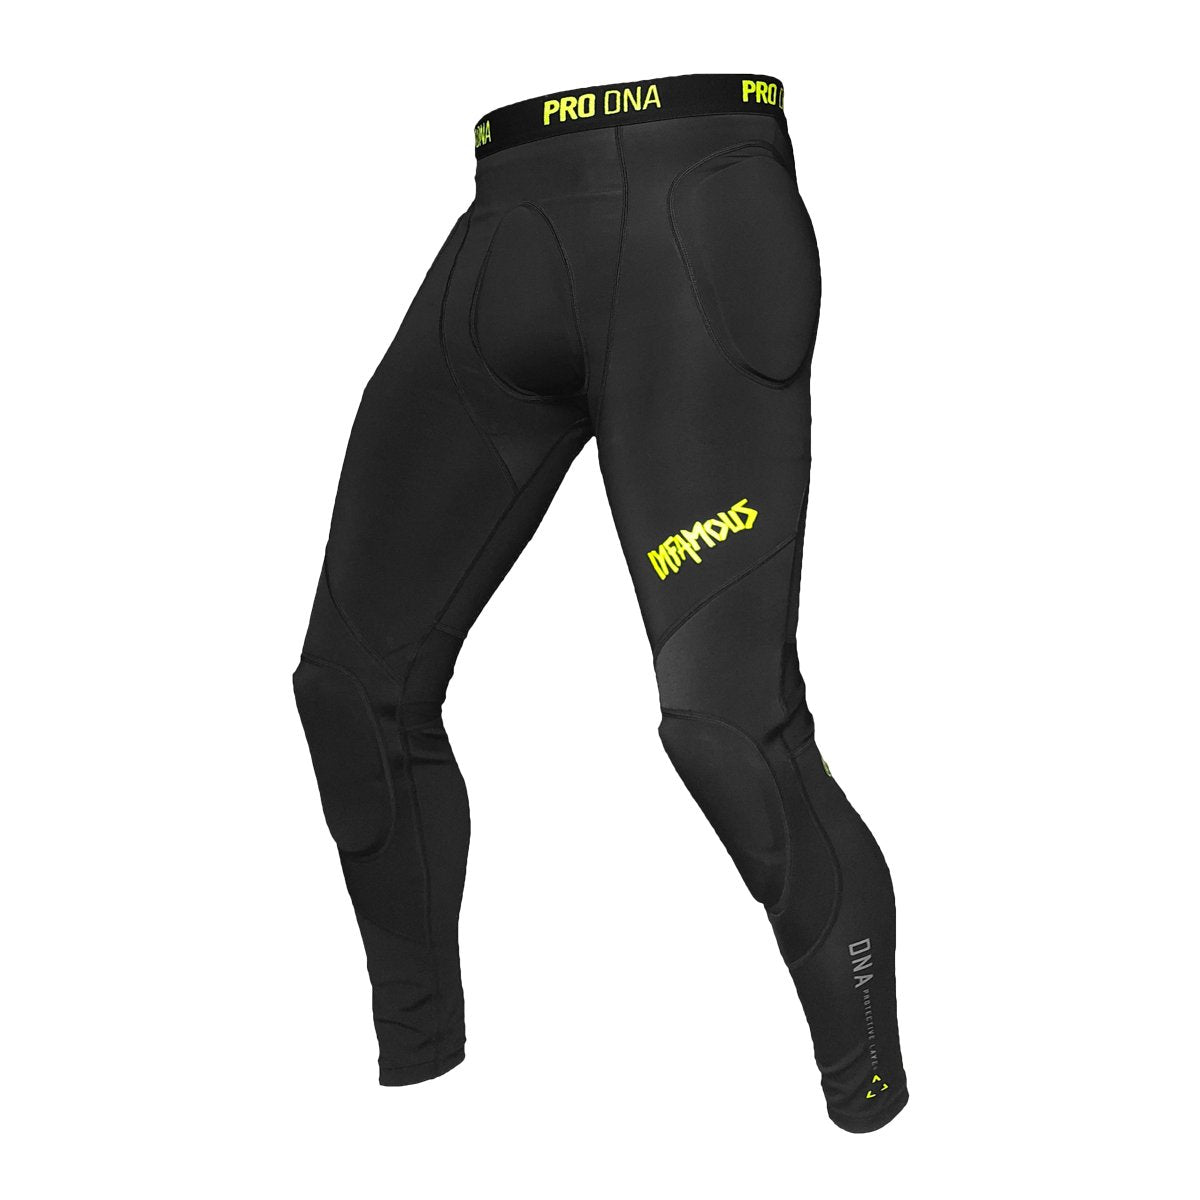 Infamous Pro DNA Slide Pant - Small